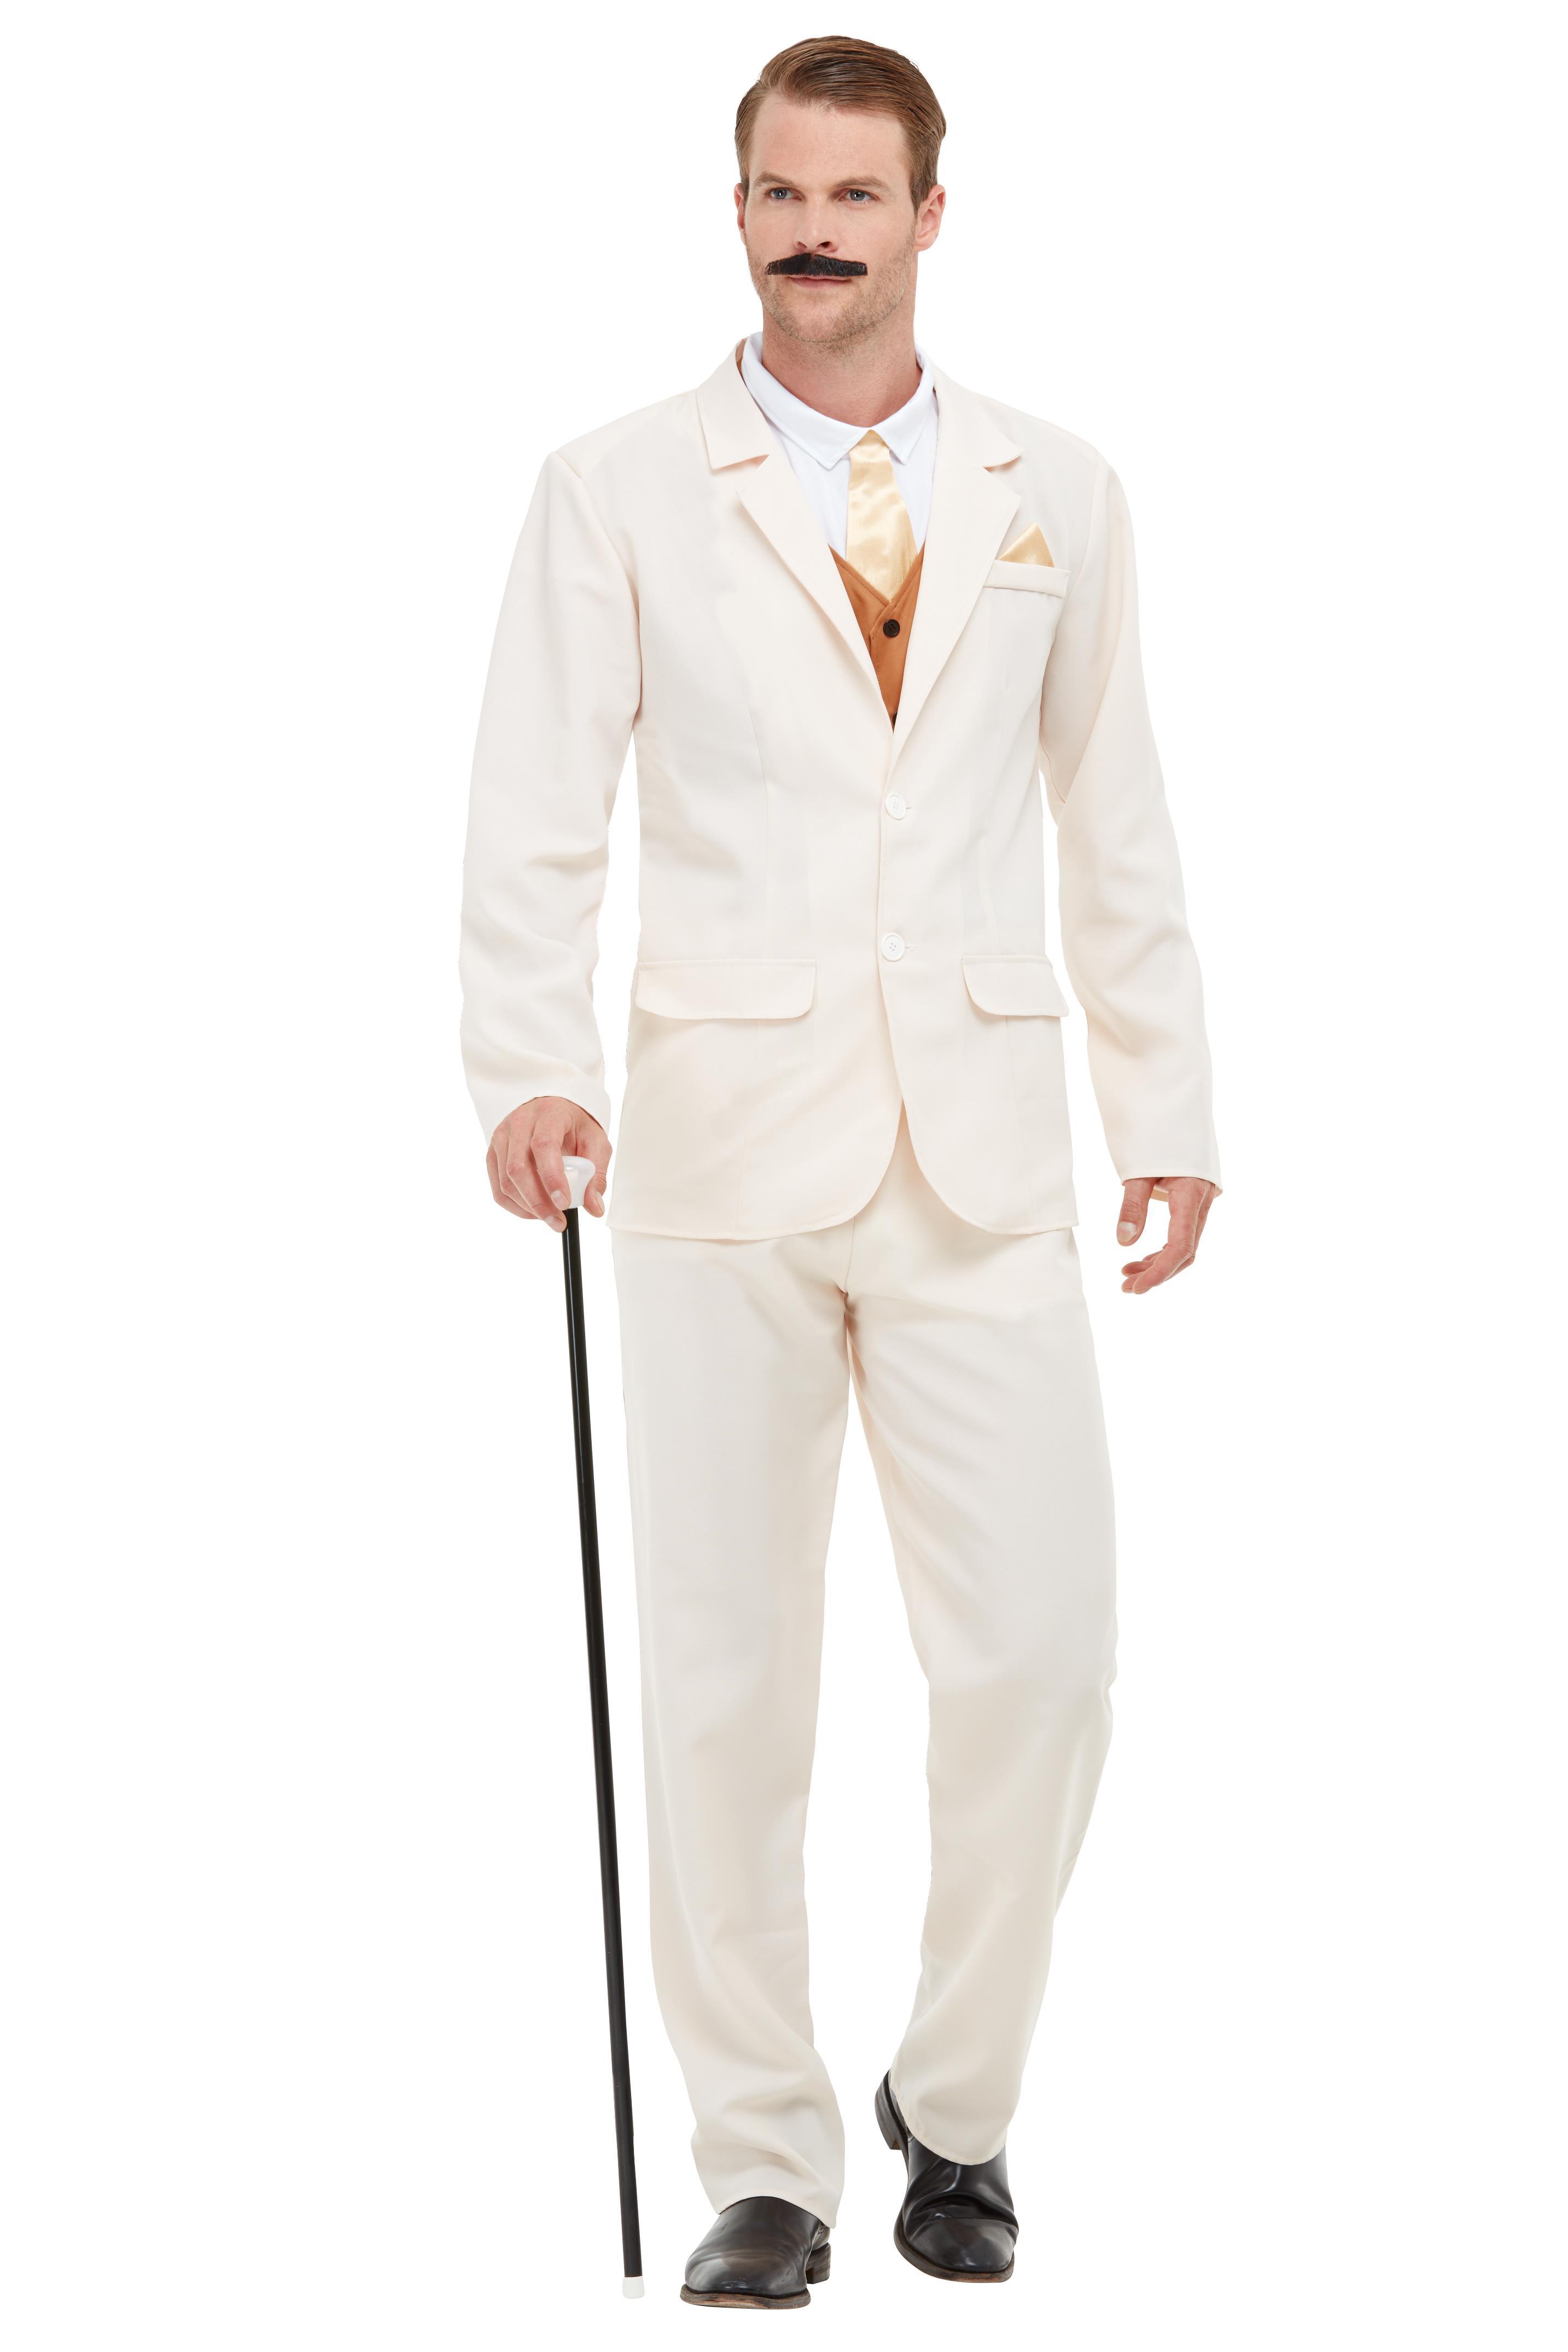 men's roaring 20's outfit